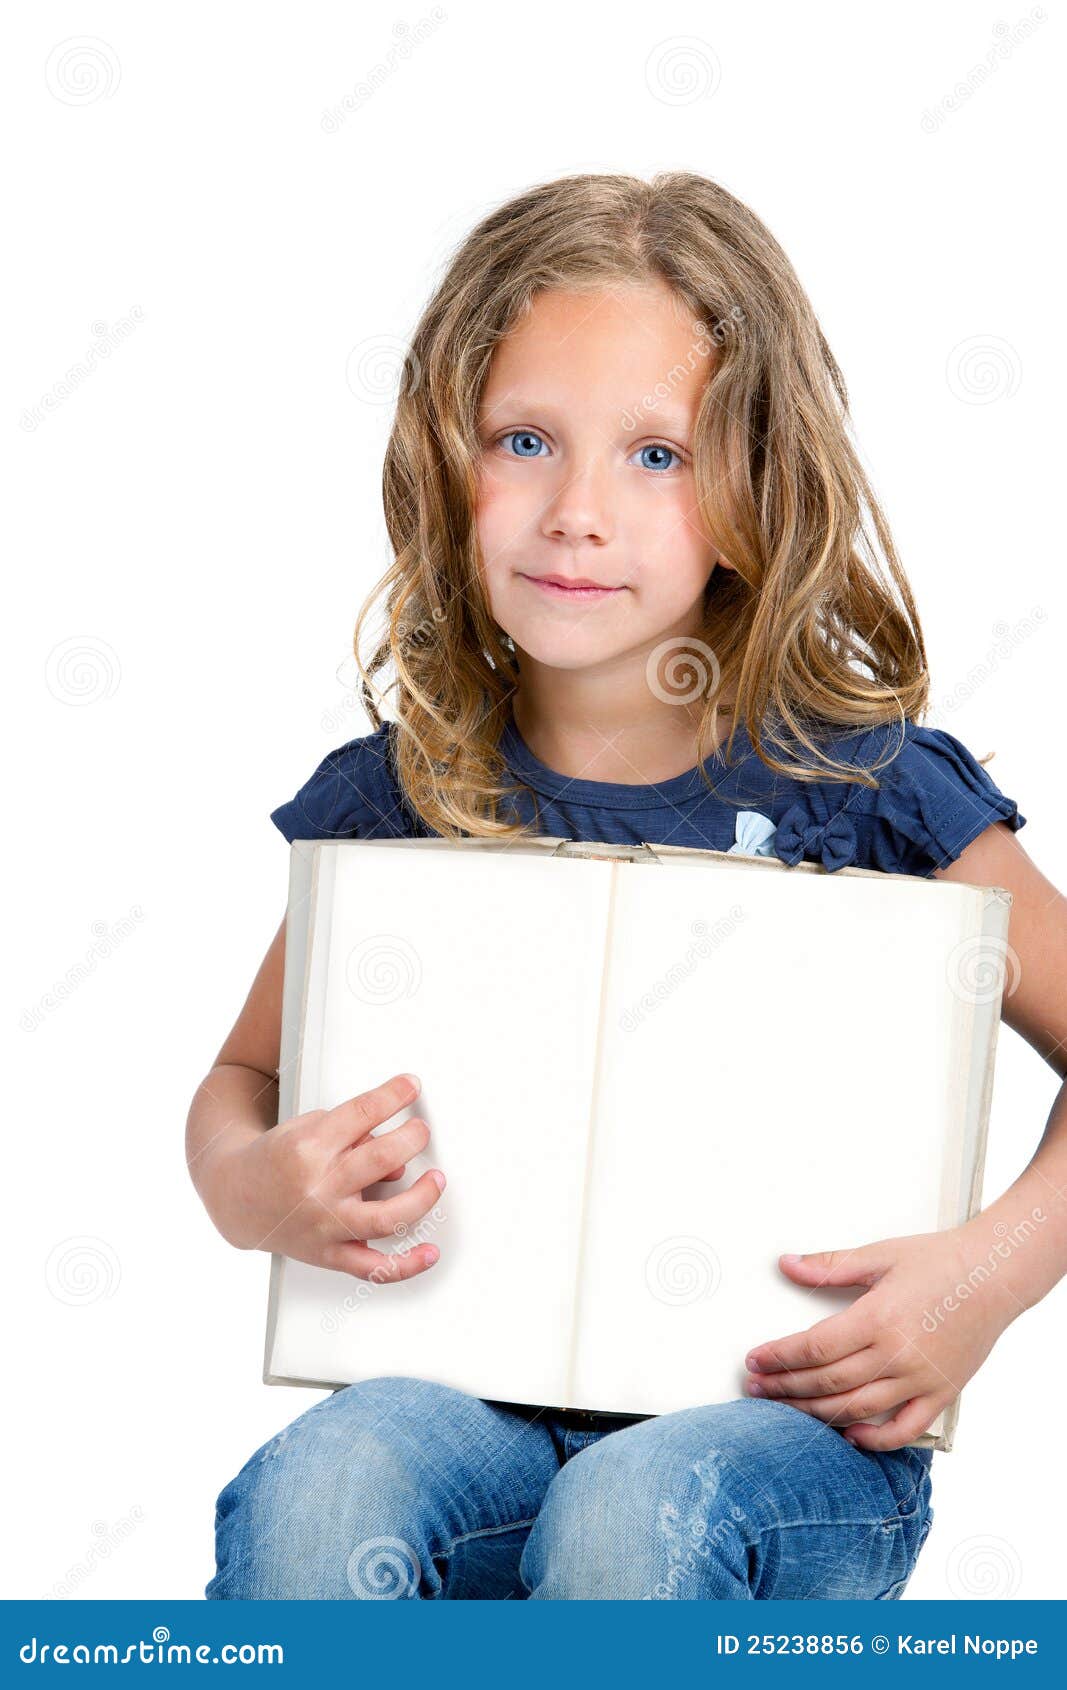 Woman holding book with blank pages · Free Stock Photo